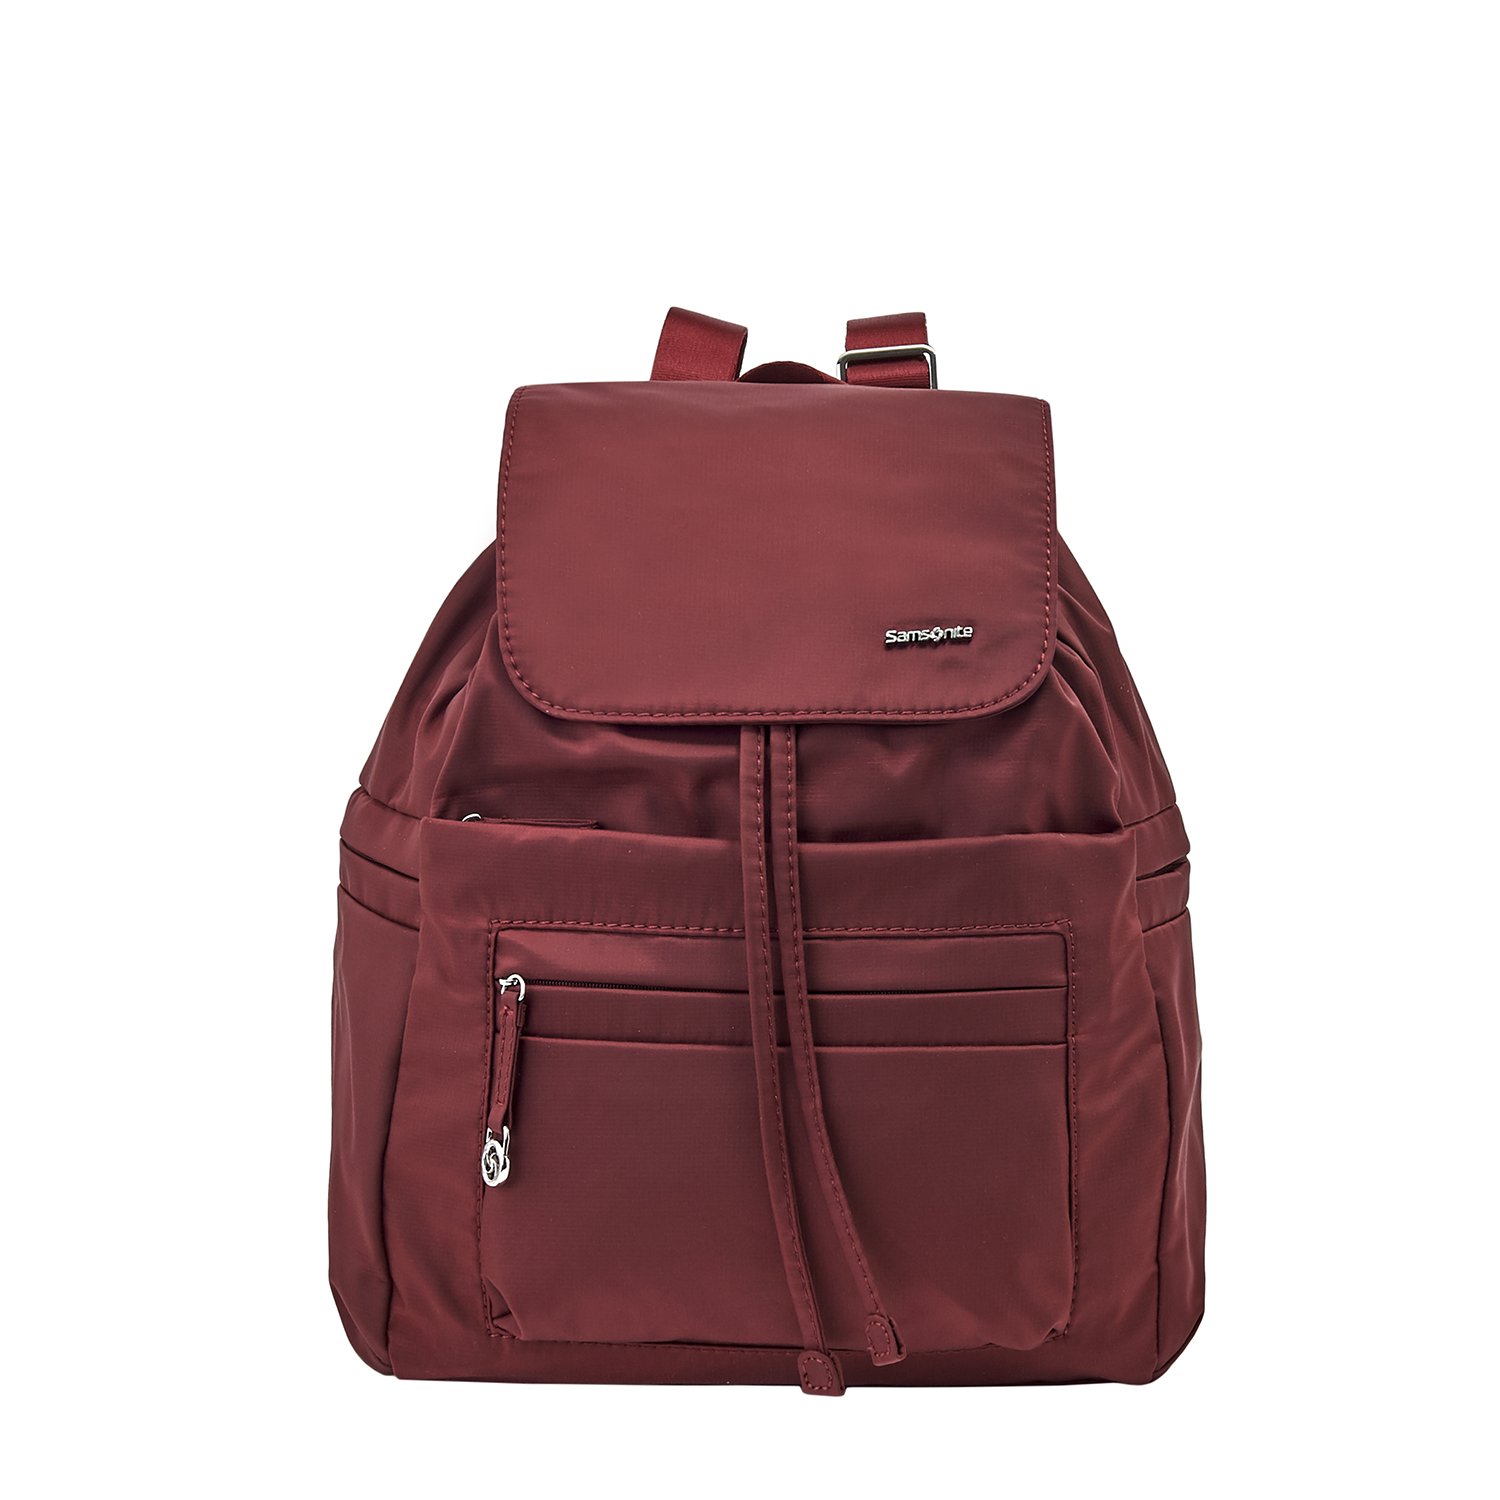 MOVE 2.0-BACKPACK+FLAP S88D-014-SF000*10